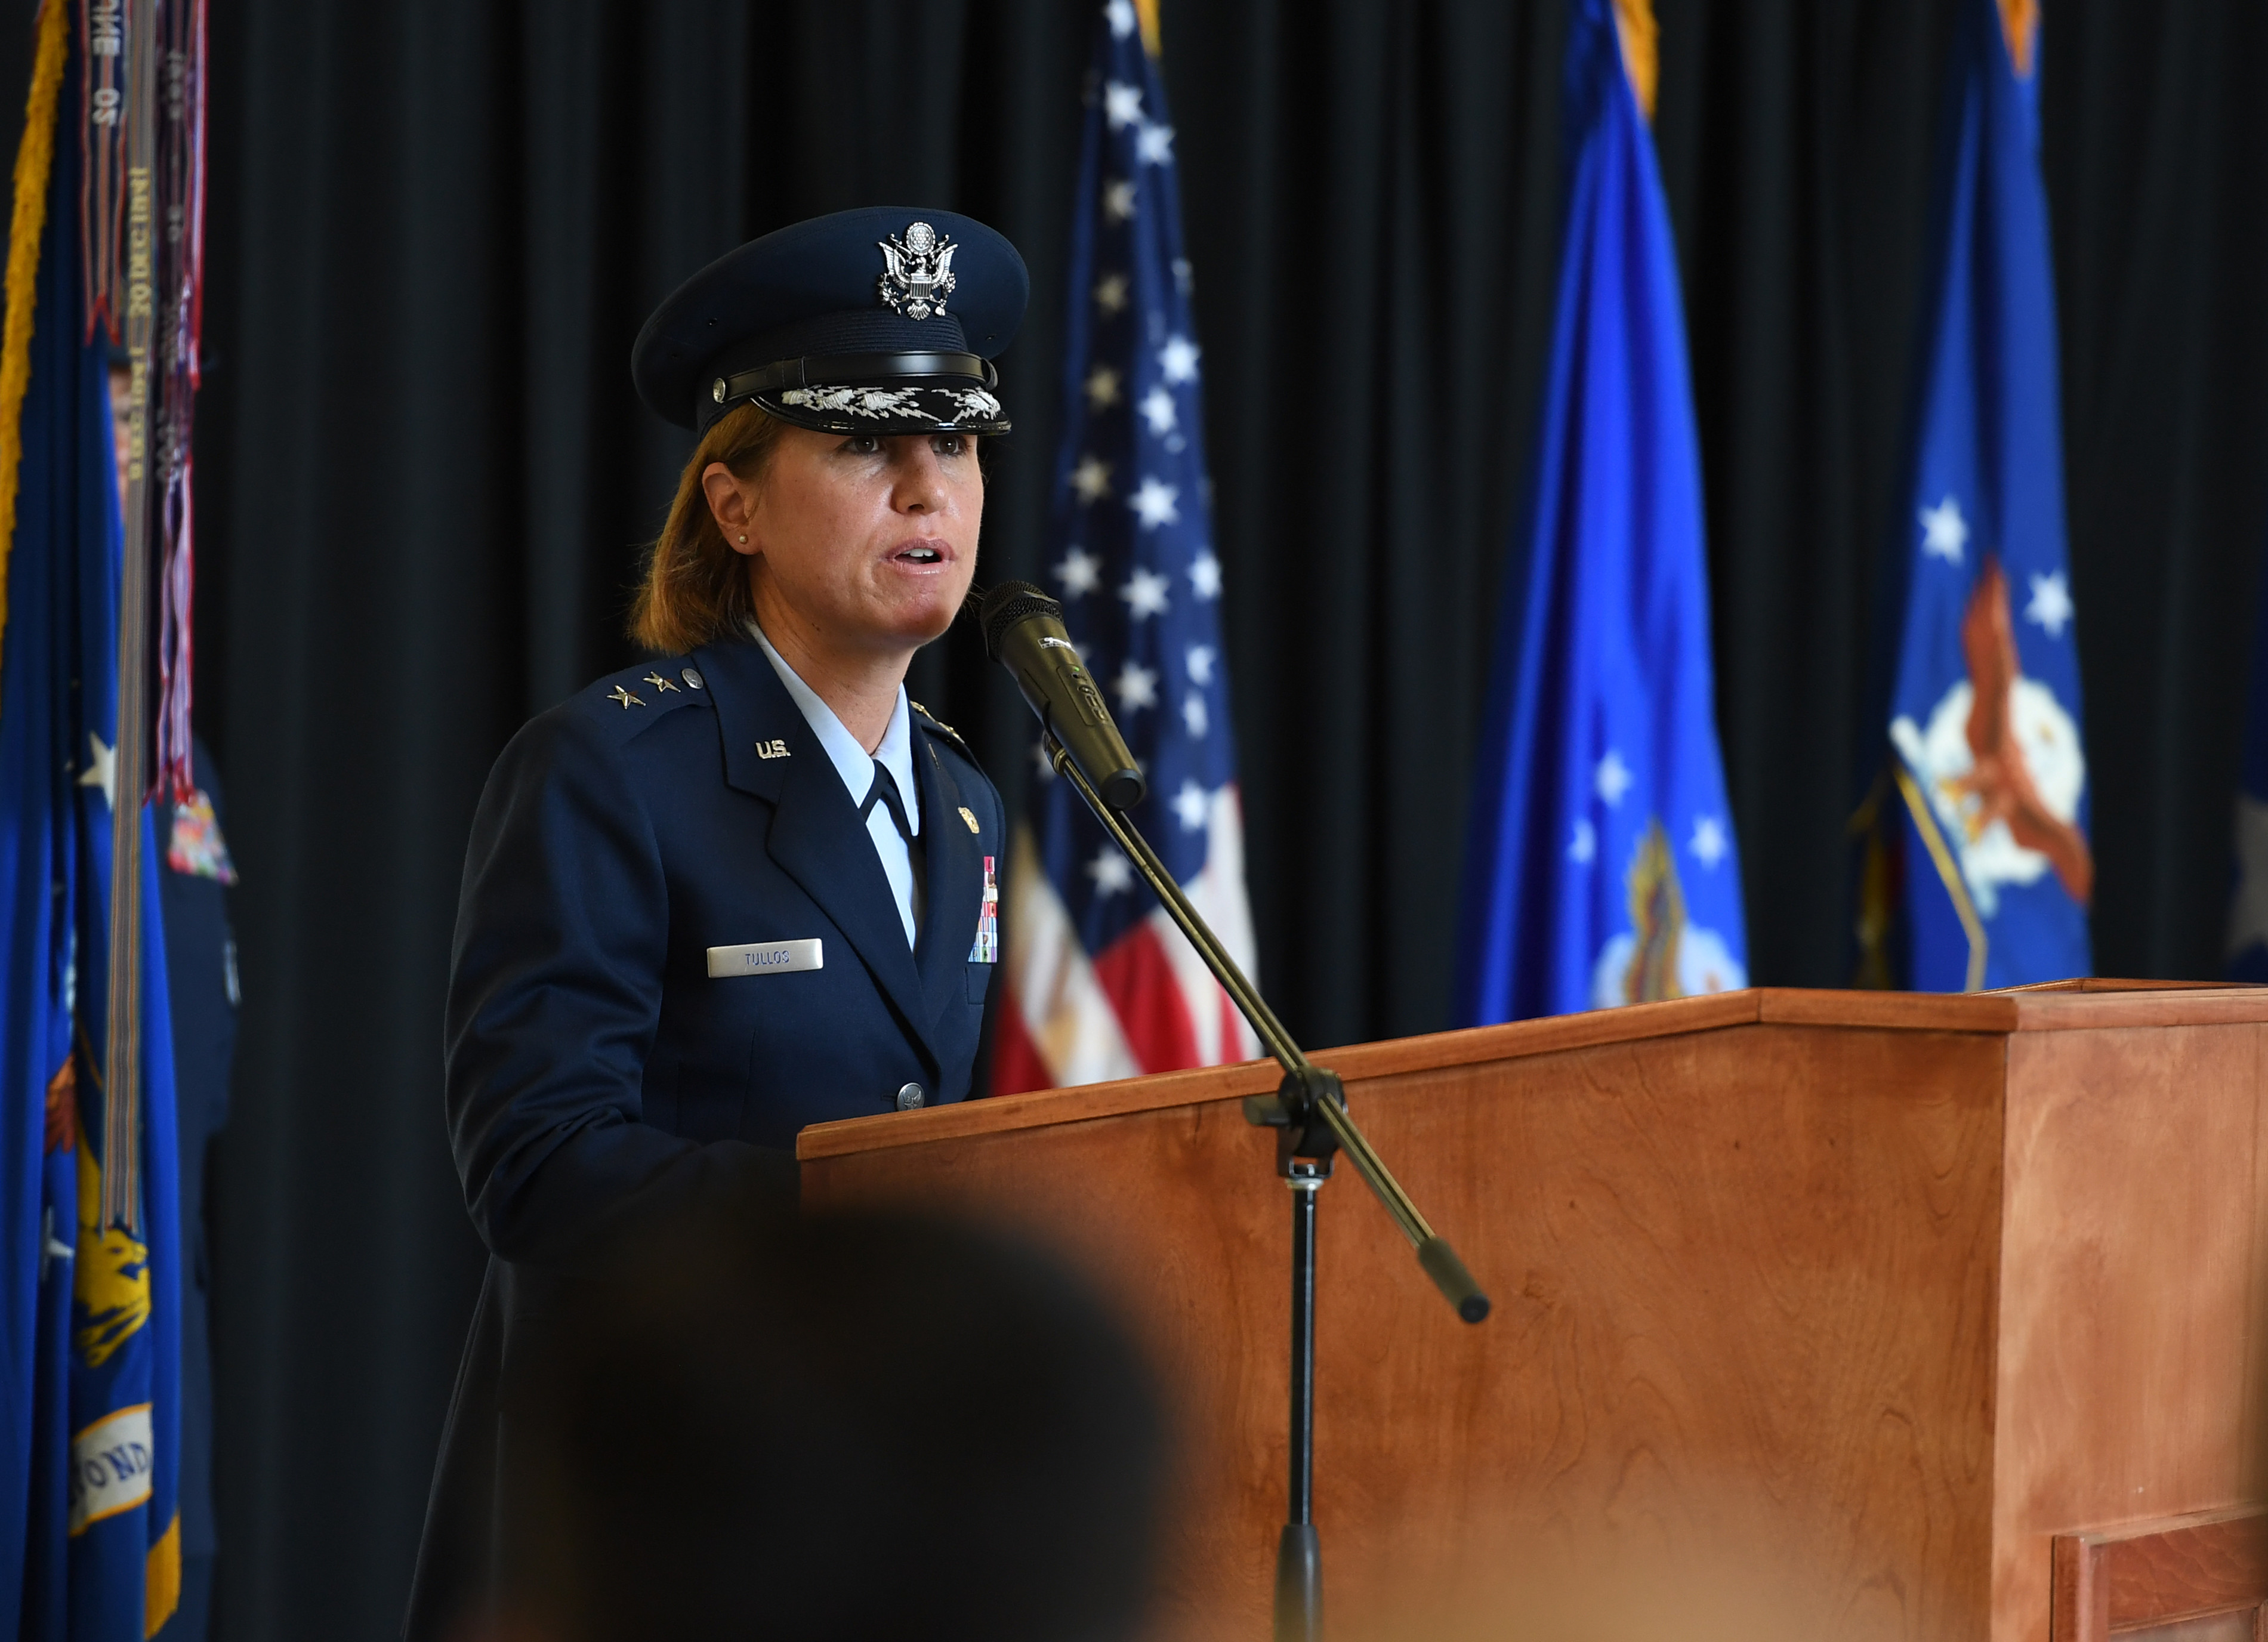 second-af-welcomes-tullos-bids-farewell-to-leahy